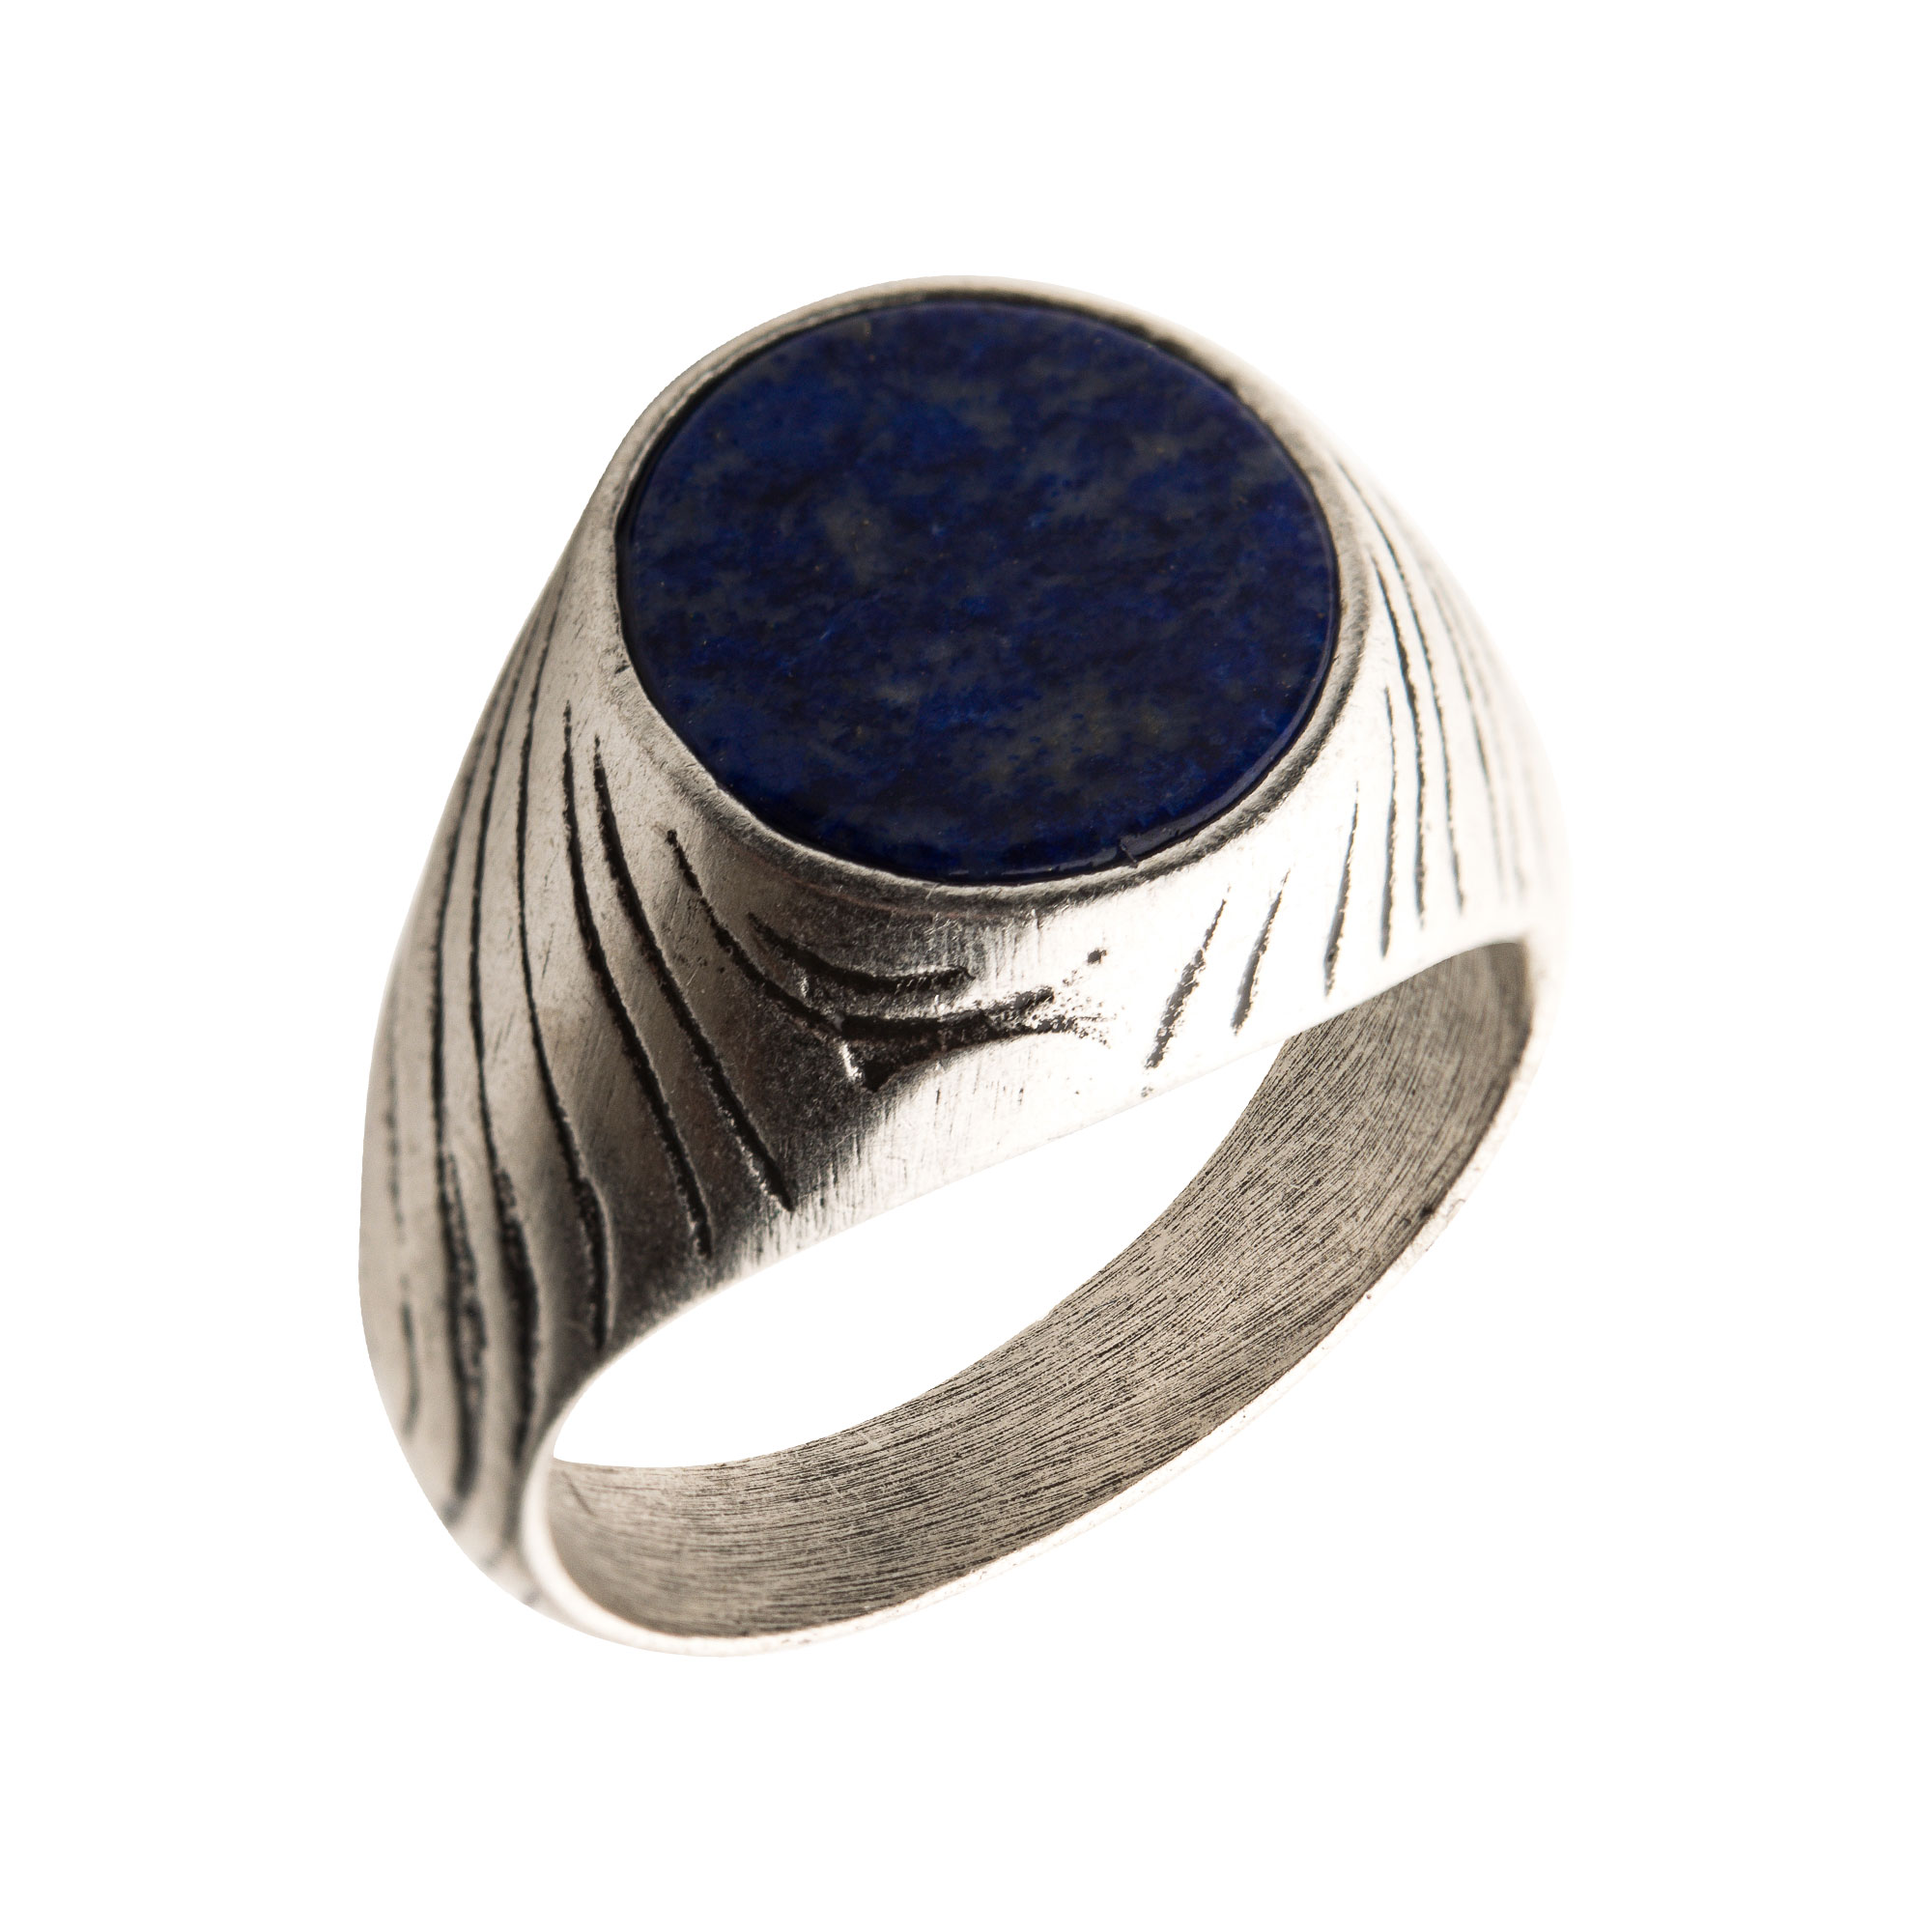 Stainless Steel Silver Plated with Lapis Stone Ring Ken Walker Jewelers Gig Harbor, WA